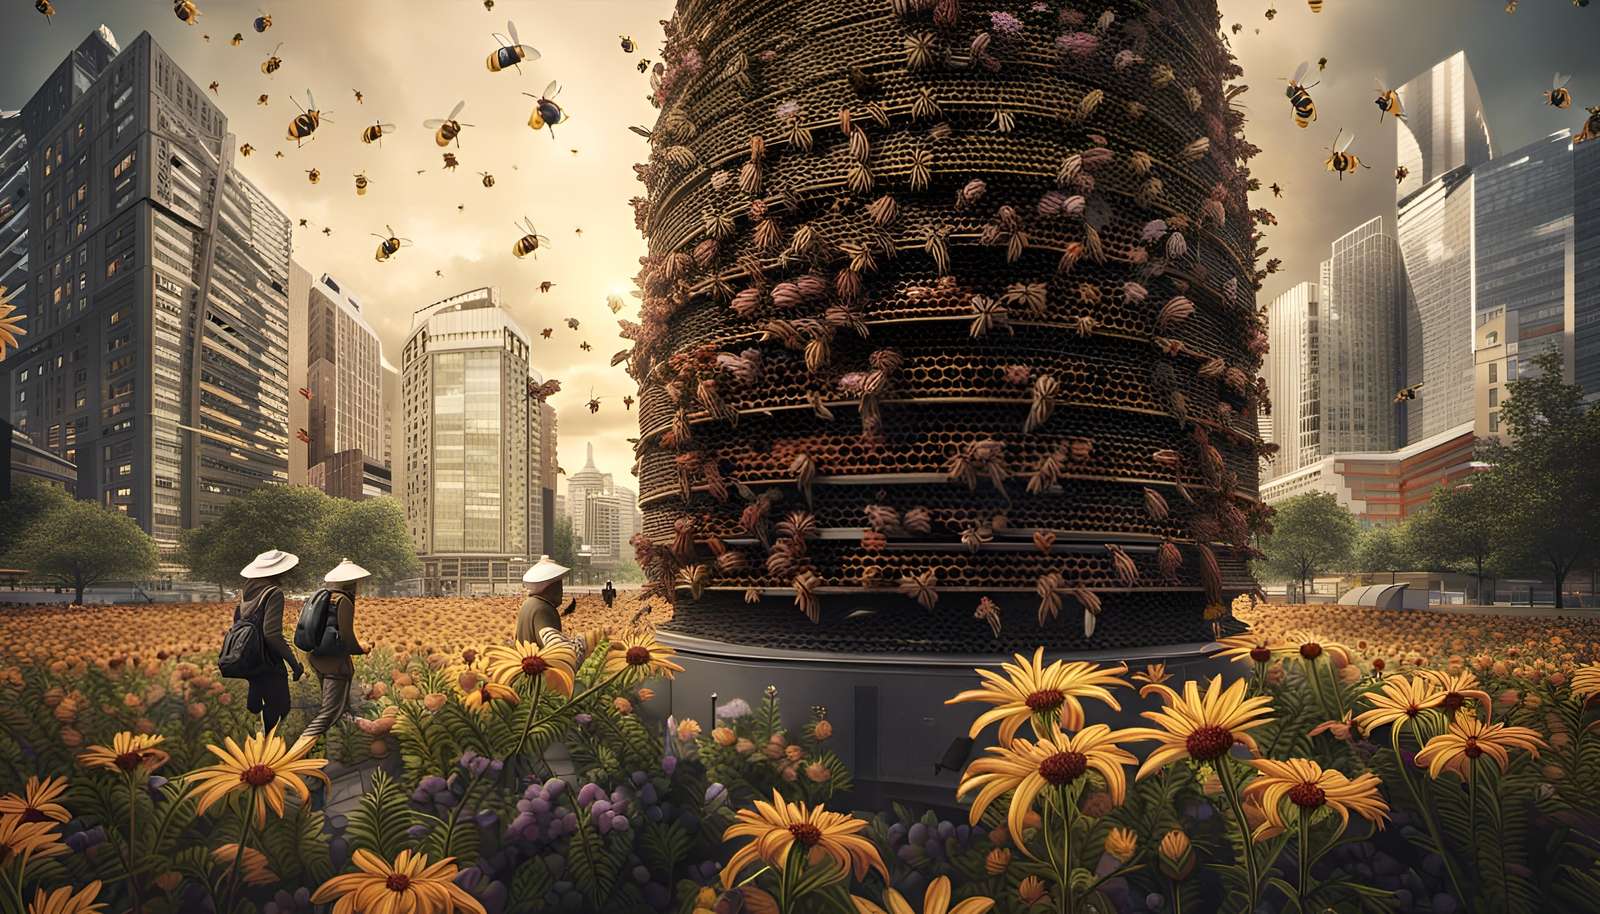 Bees in the City online puzzle